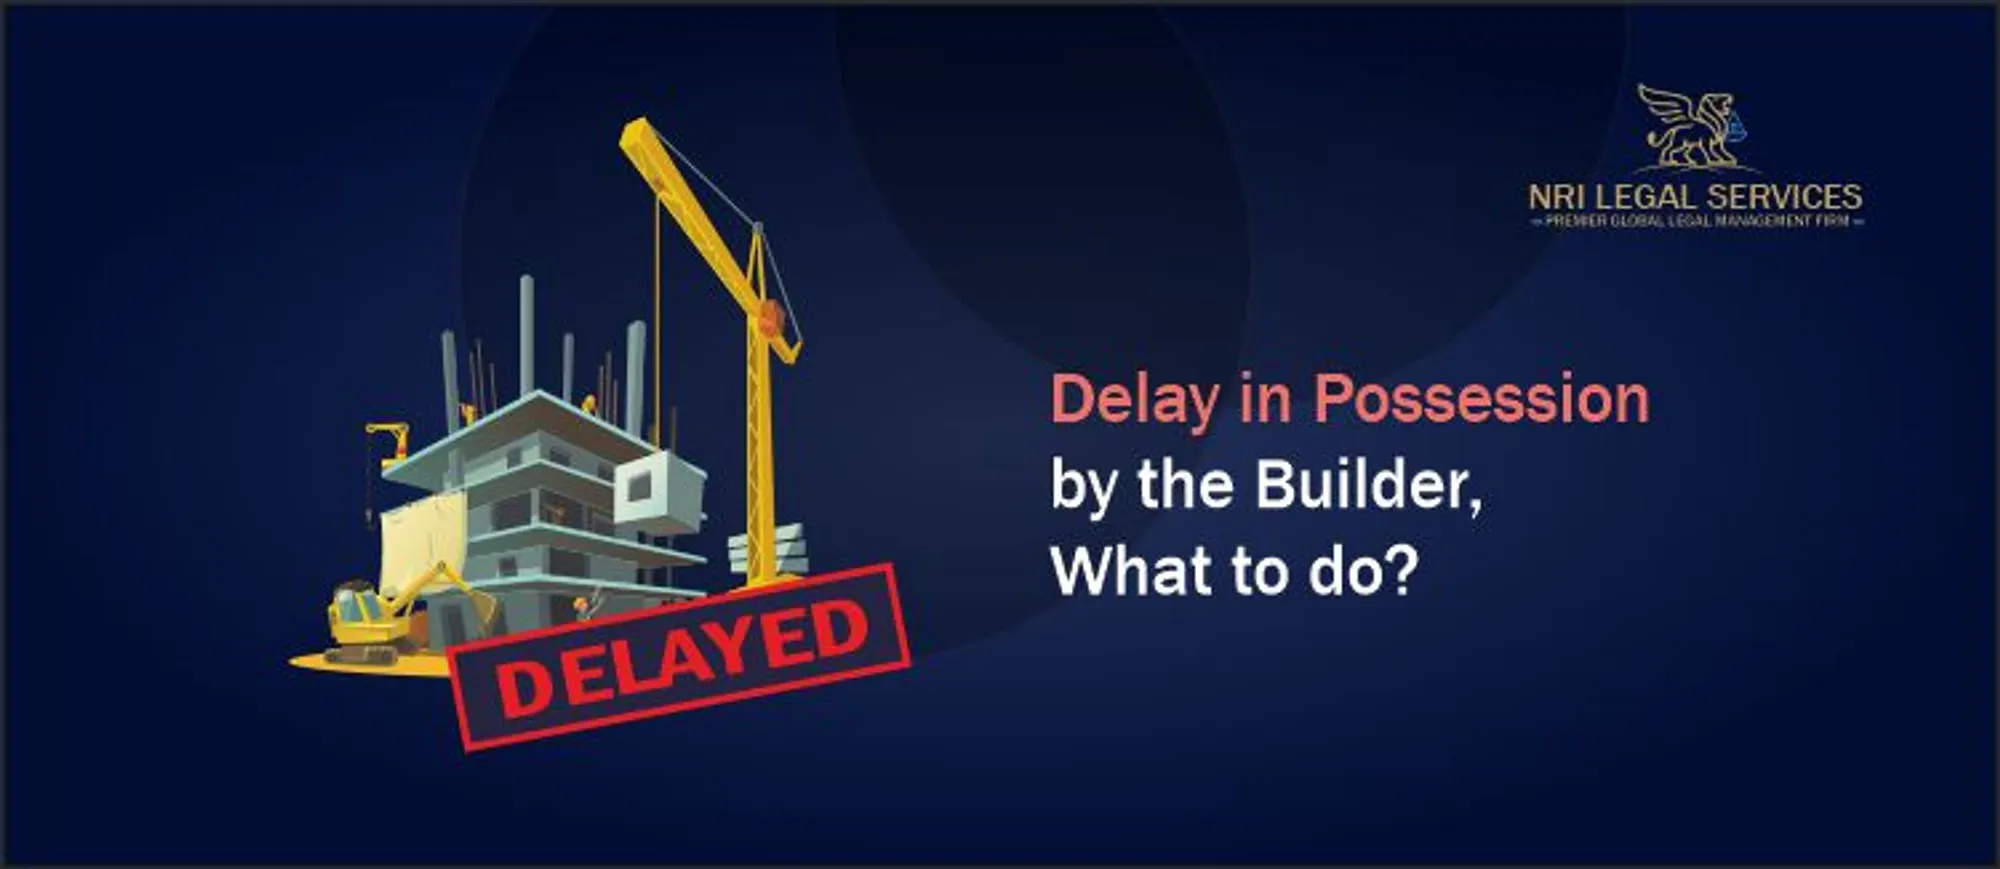 Delay in Possession by the Builder, What to do?